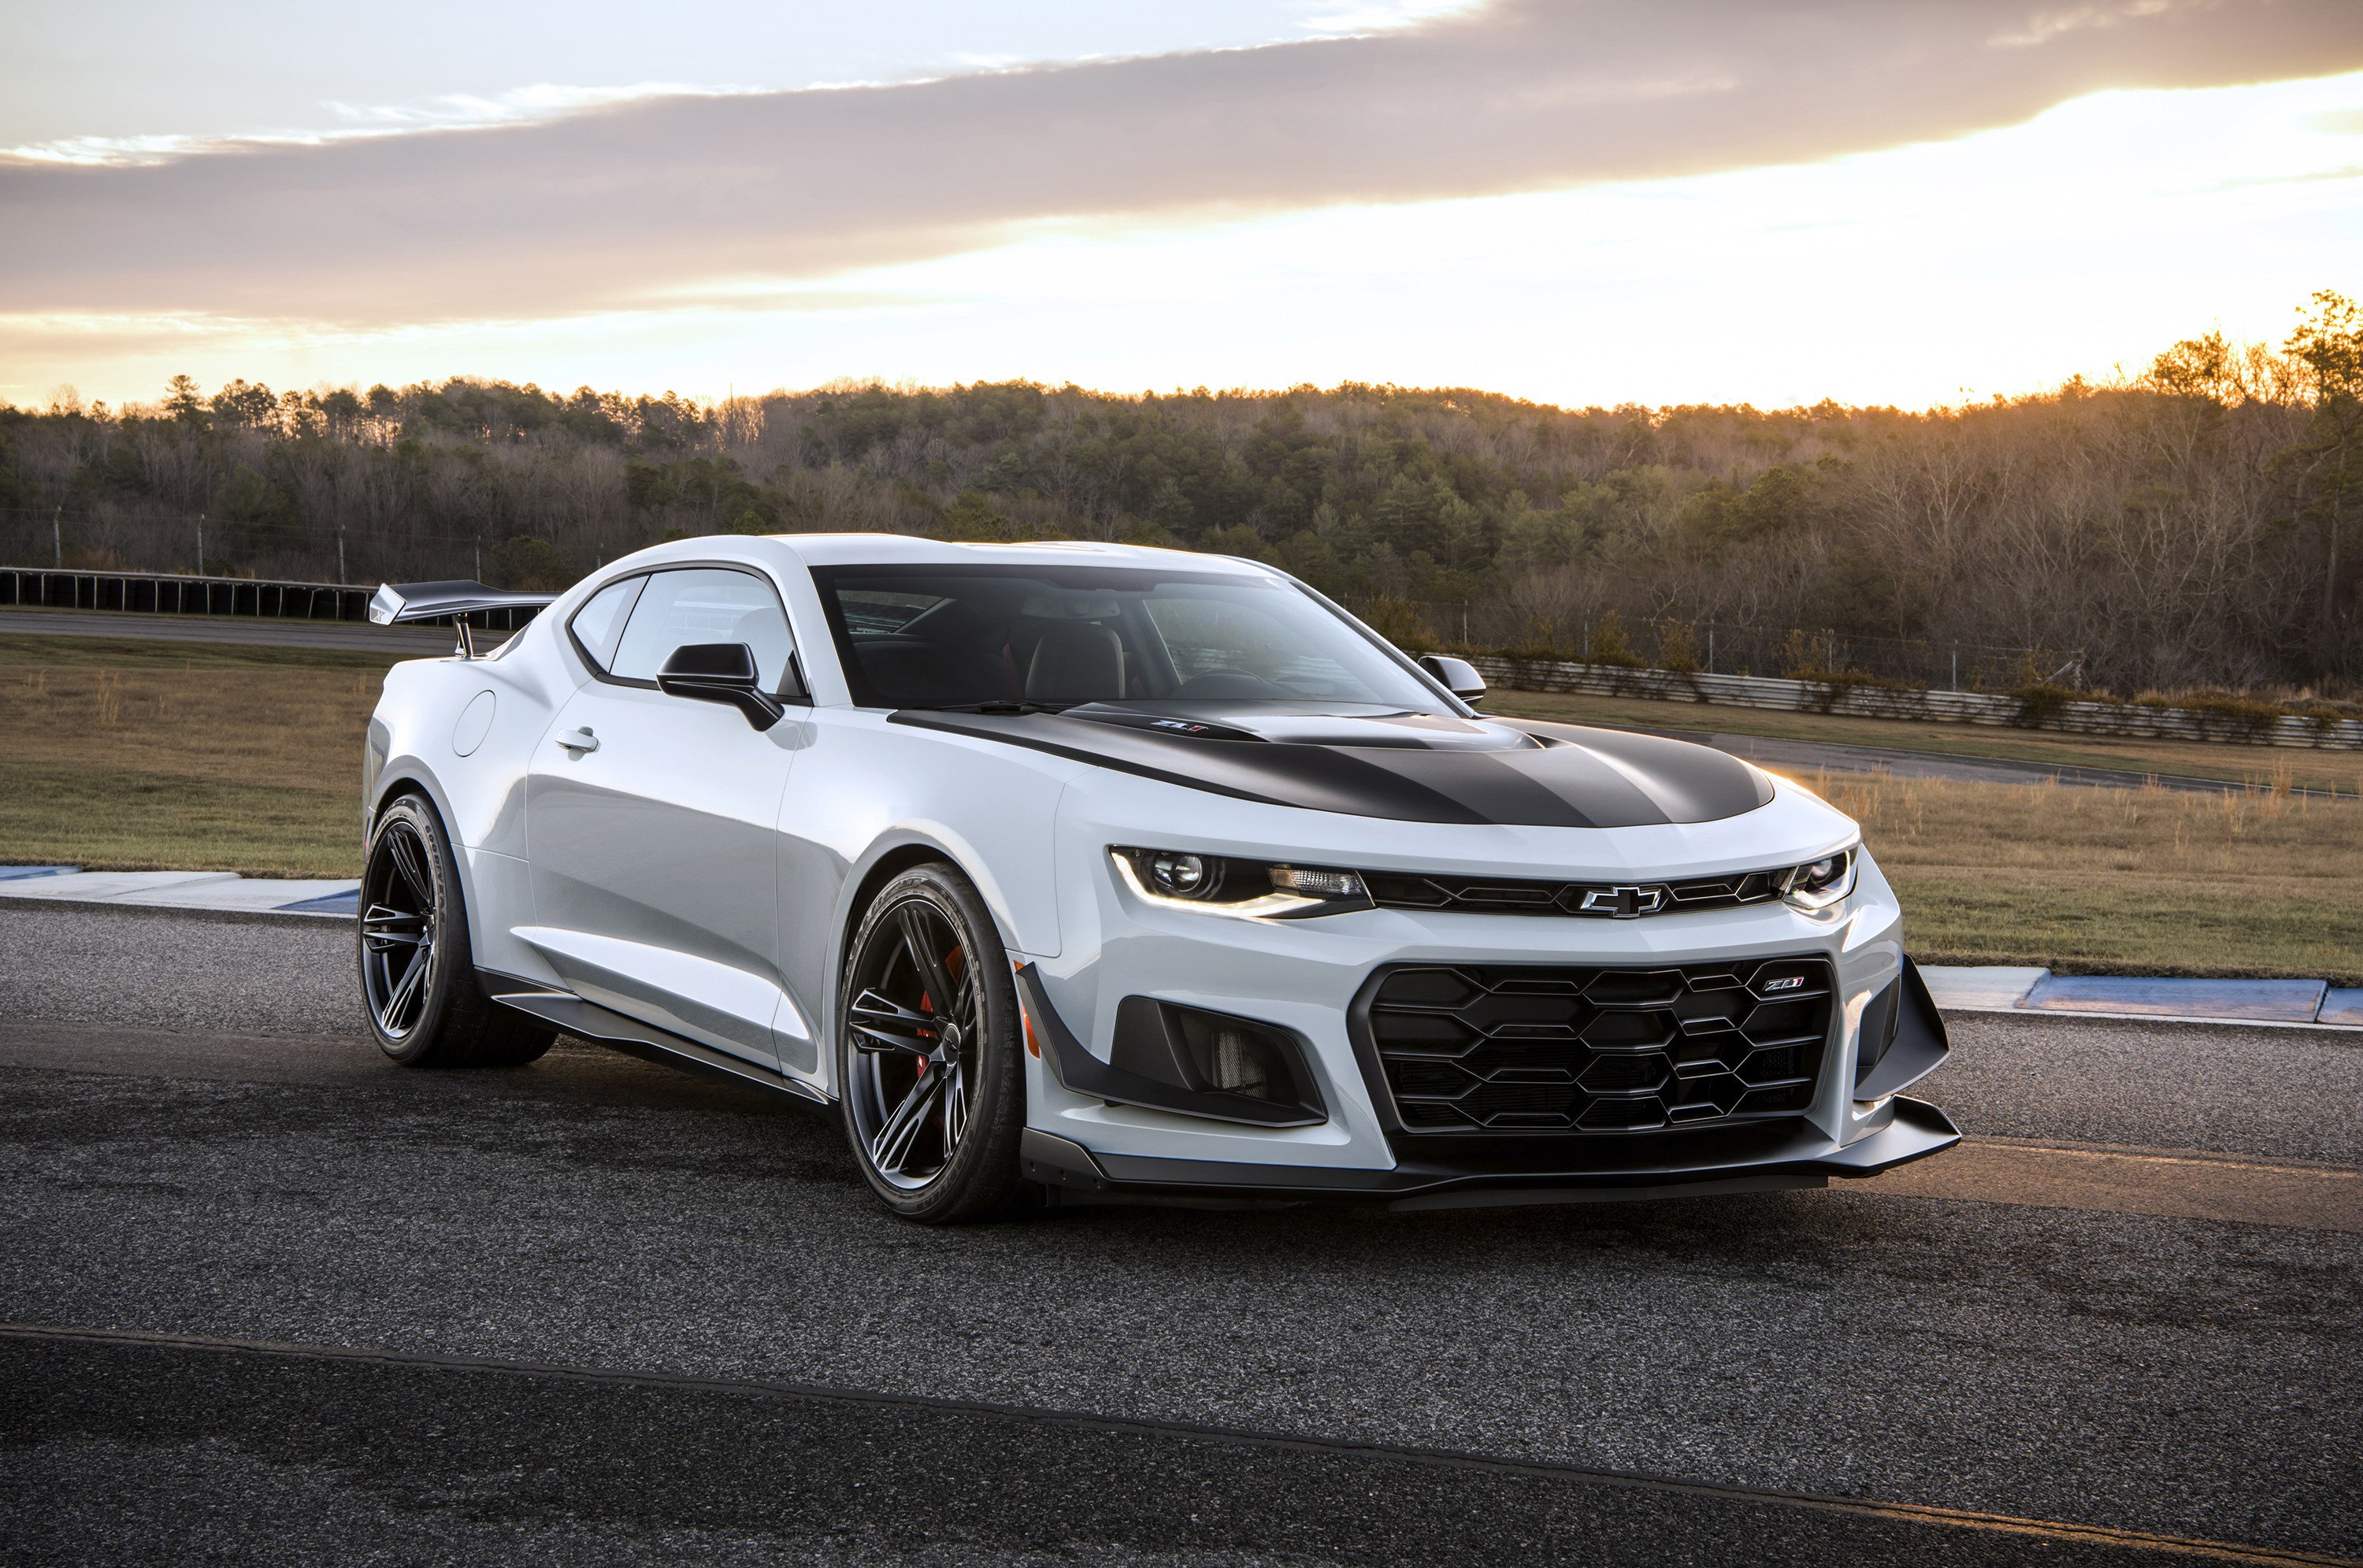 Wallpaper Of The Day: 2019 Chevy Camaro ZL1 1LE